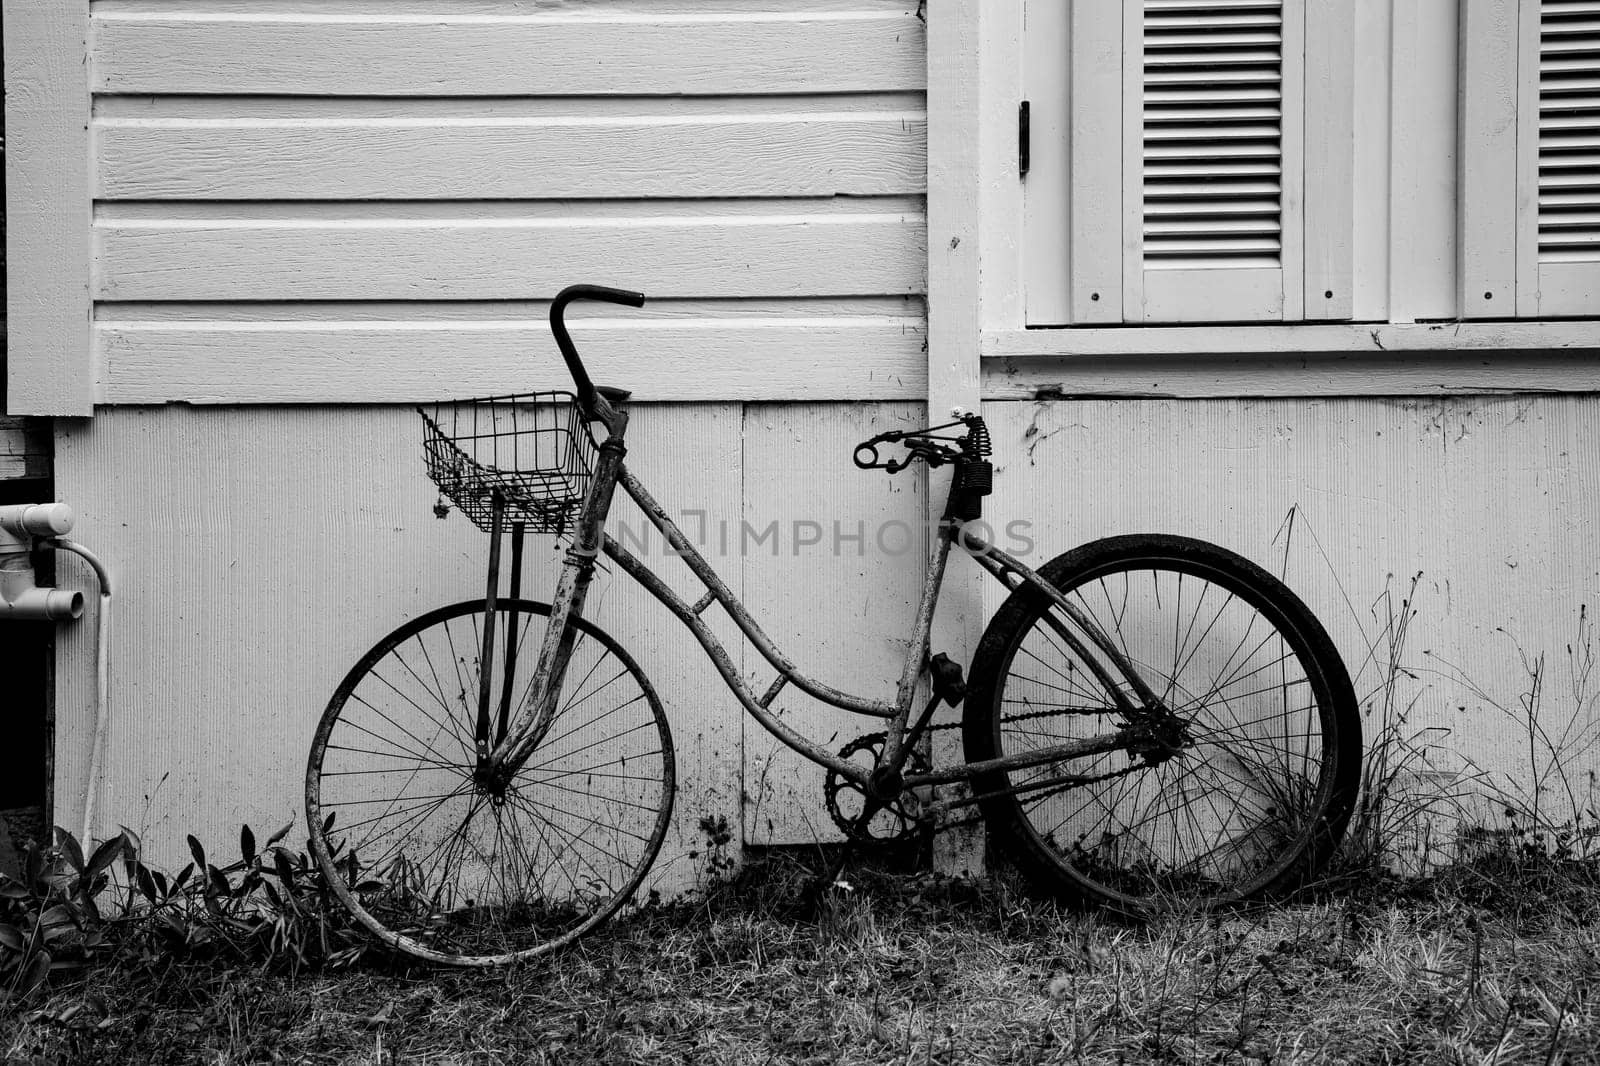 A black and white photo of an old bicycle with metal basket on the front while leaning against a house